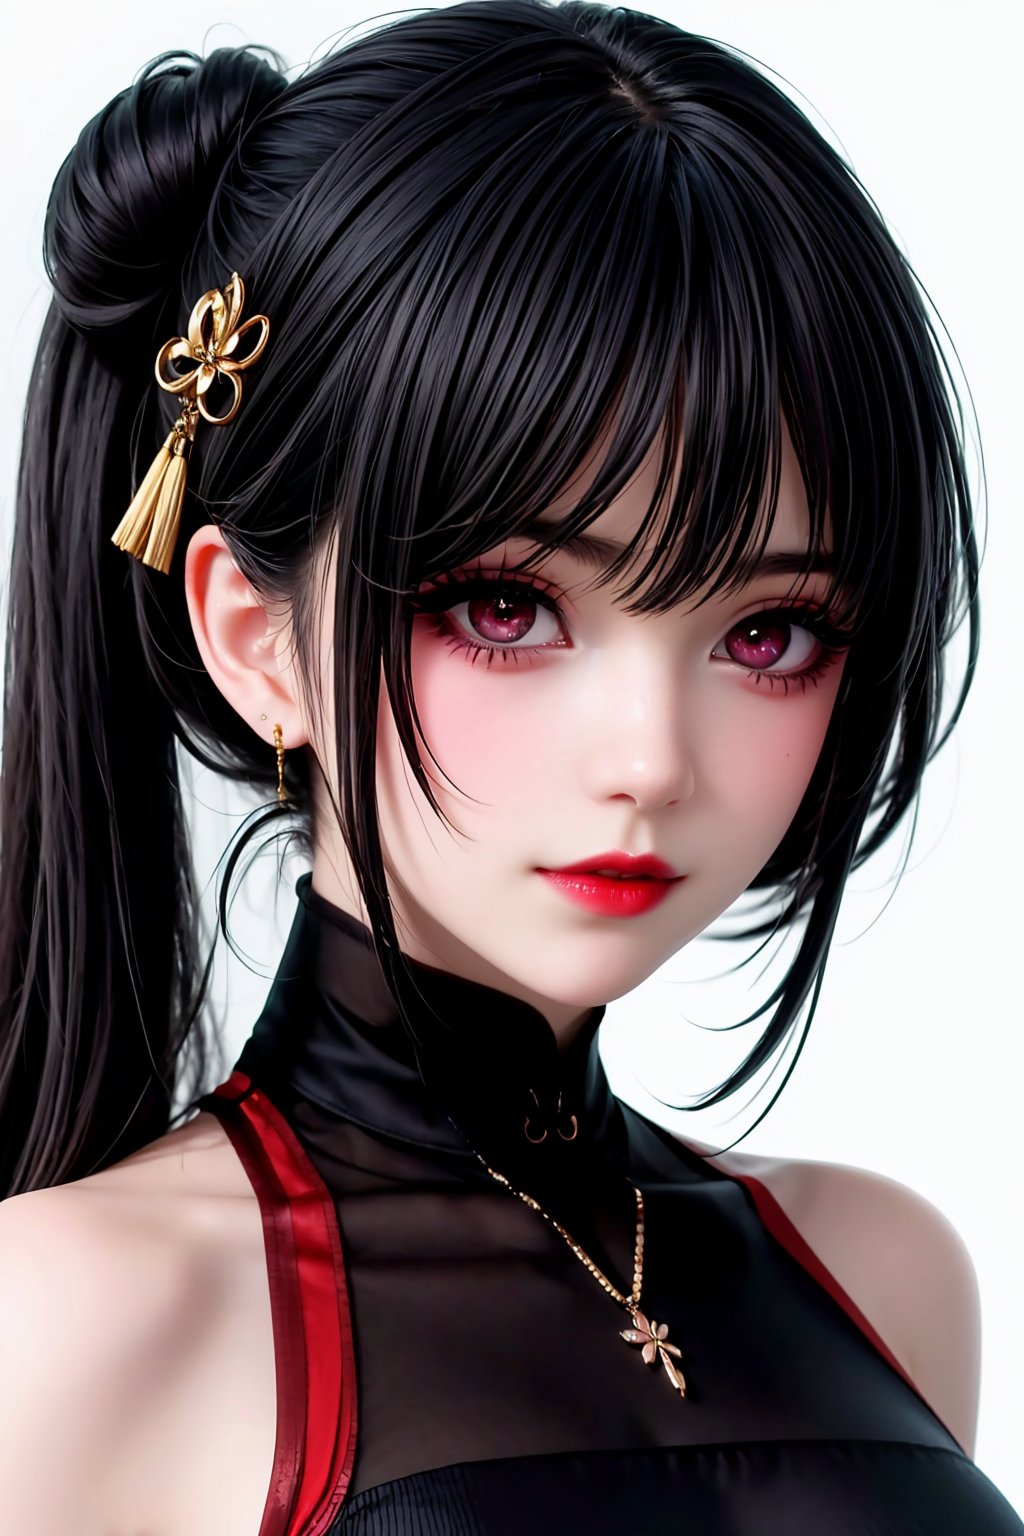 A 17-year-old Korean girl stands confidently in a simple white background, her slender figure wrapped in a vibrant red cheongsam swimsuit. Her raven-black hair is styled in two adorable buns, adorned with tiny Pokies charms. She wears a pastel-colored tee that complements her porcelain-fair skin, showcasing an extremely delicate and beautiful face. Slightly upturned lips curve into a gentle smile, accentuating her dark red lipstick. Her big, bright eyes seem to sparkle with an inner light, framed by thick lashes. The subject's gaze is direct, as if challenging the viewer. Her photorealistic features are rendered in exquisite detail, from the fine skin texture to the subtle curves of her eyebrows. A pair of four fingers and one thumb completes the realistic portrait, a testament to her stunning beauty., yor briar